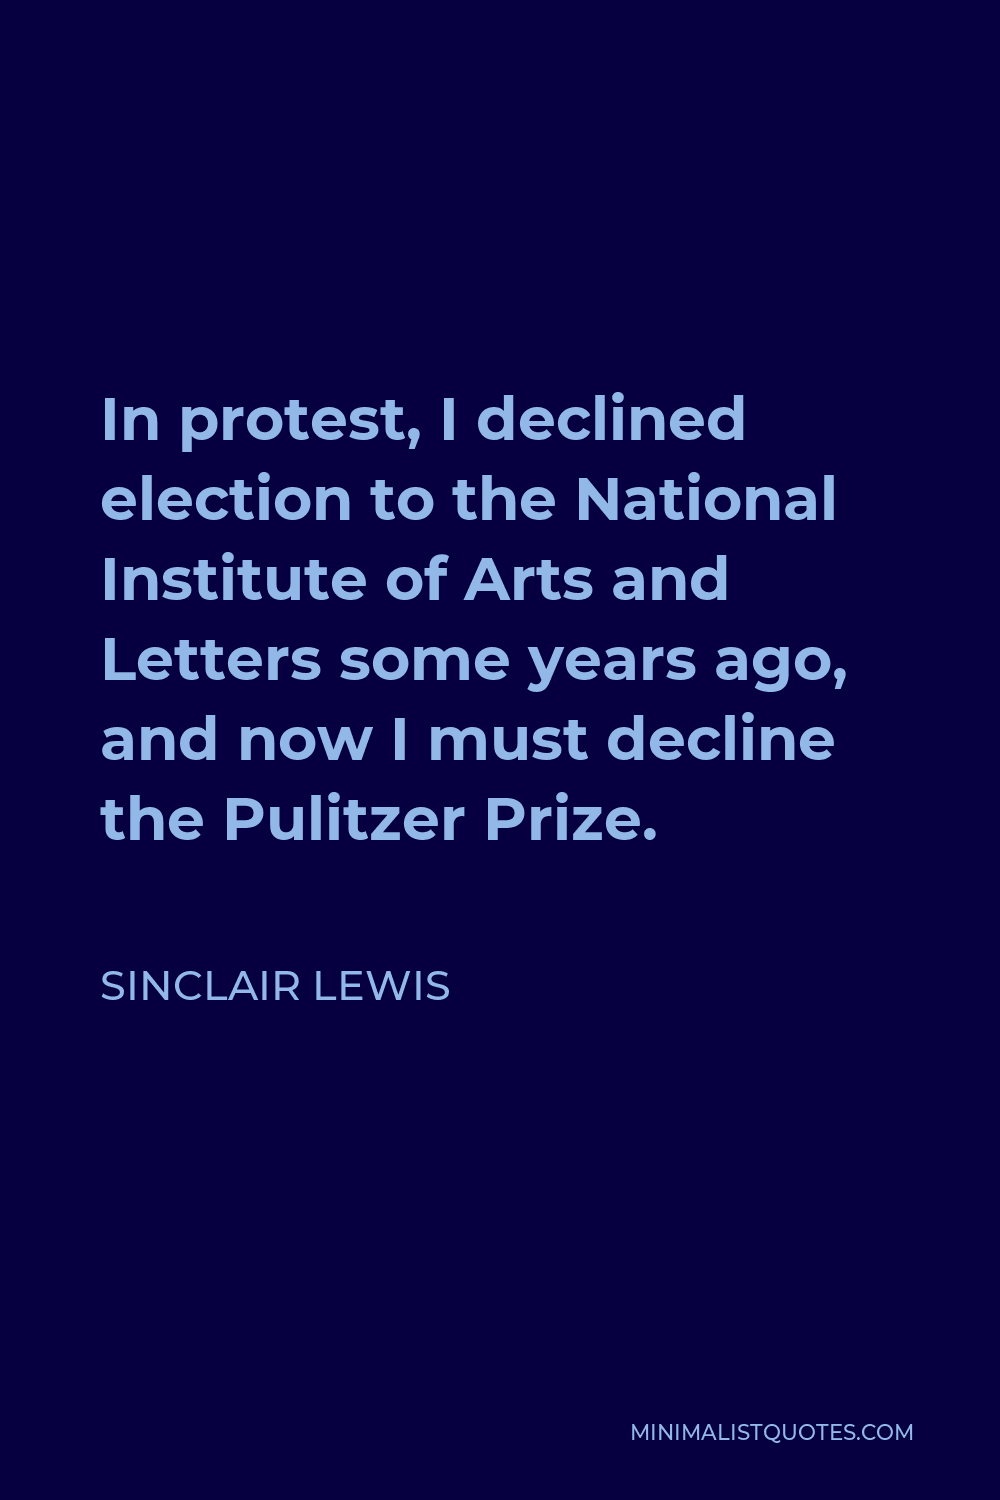 Sinclair Lewis Quote - In protest, I declined election to the National Institute of Arts and Letters some years ago, and now I must decline the Pulitzer Prize.